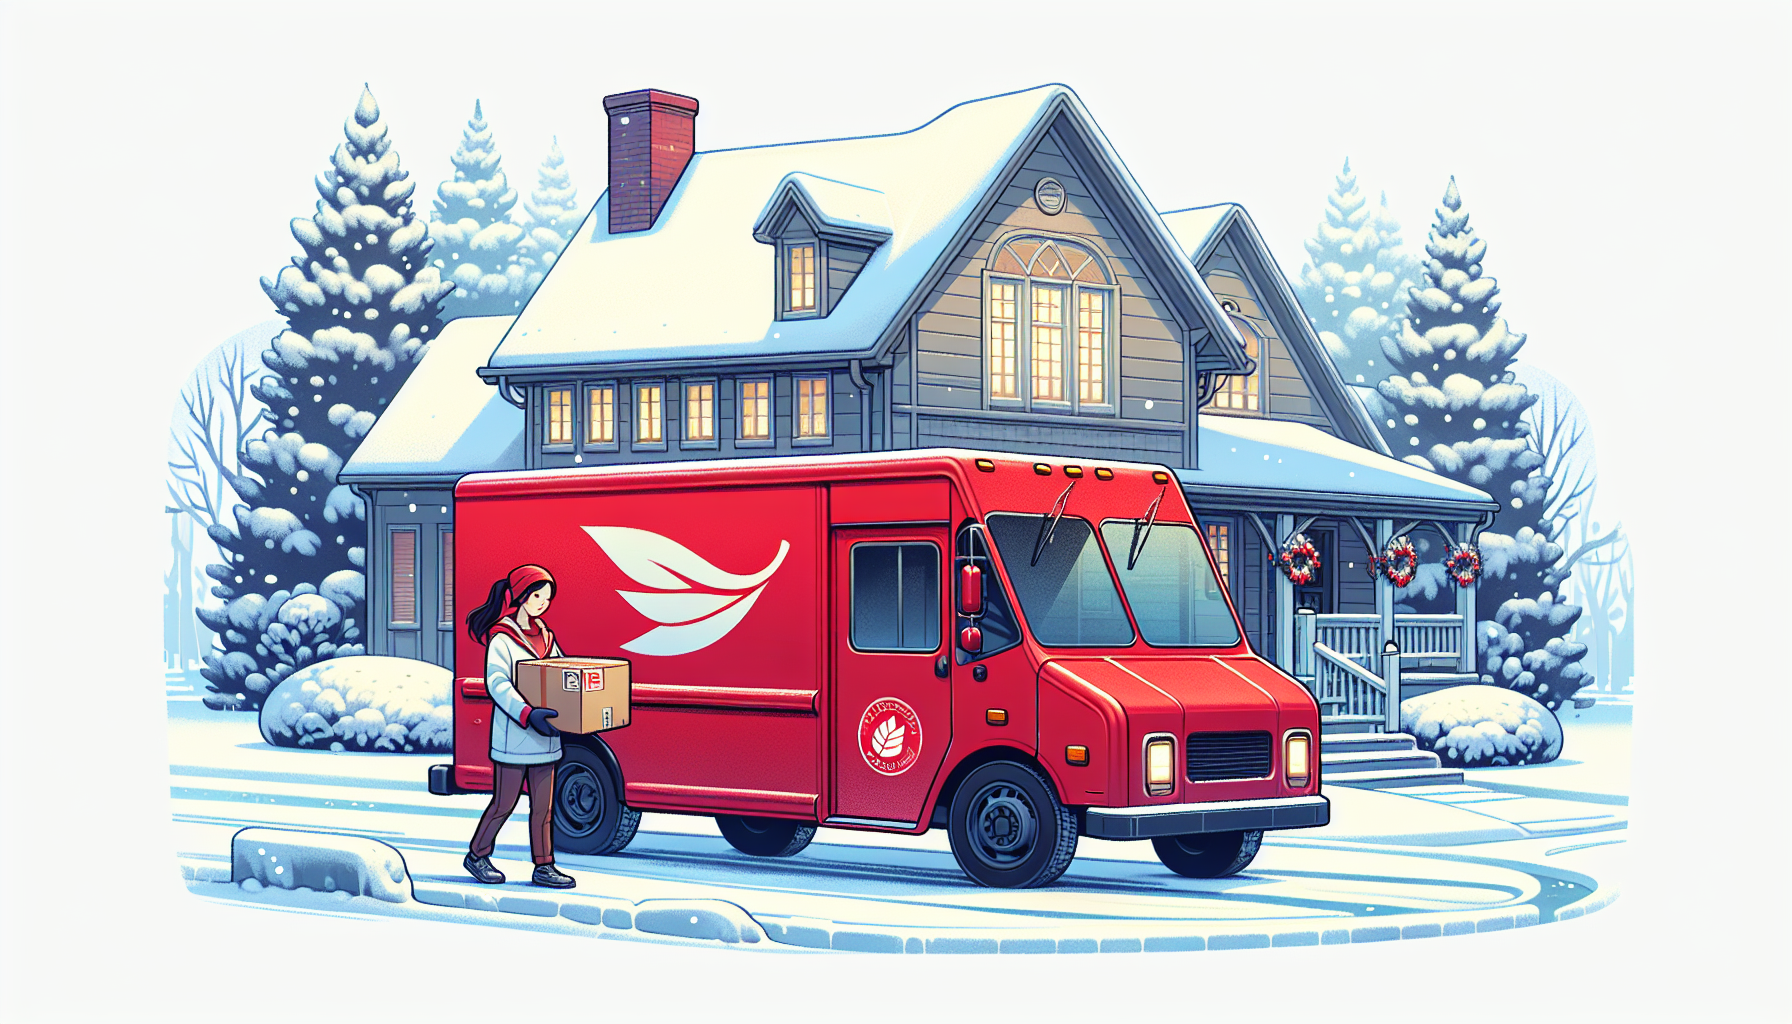 Creative illustration of a Canada Post delivery truck